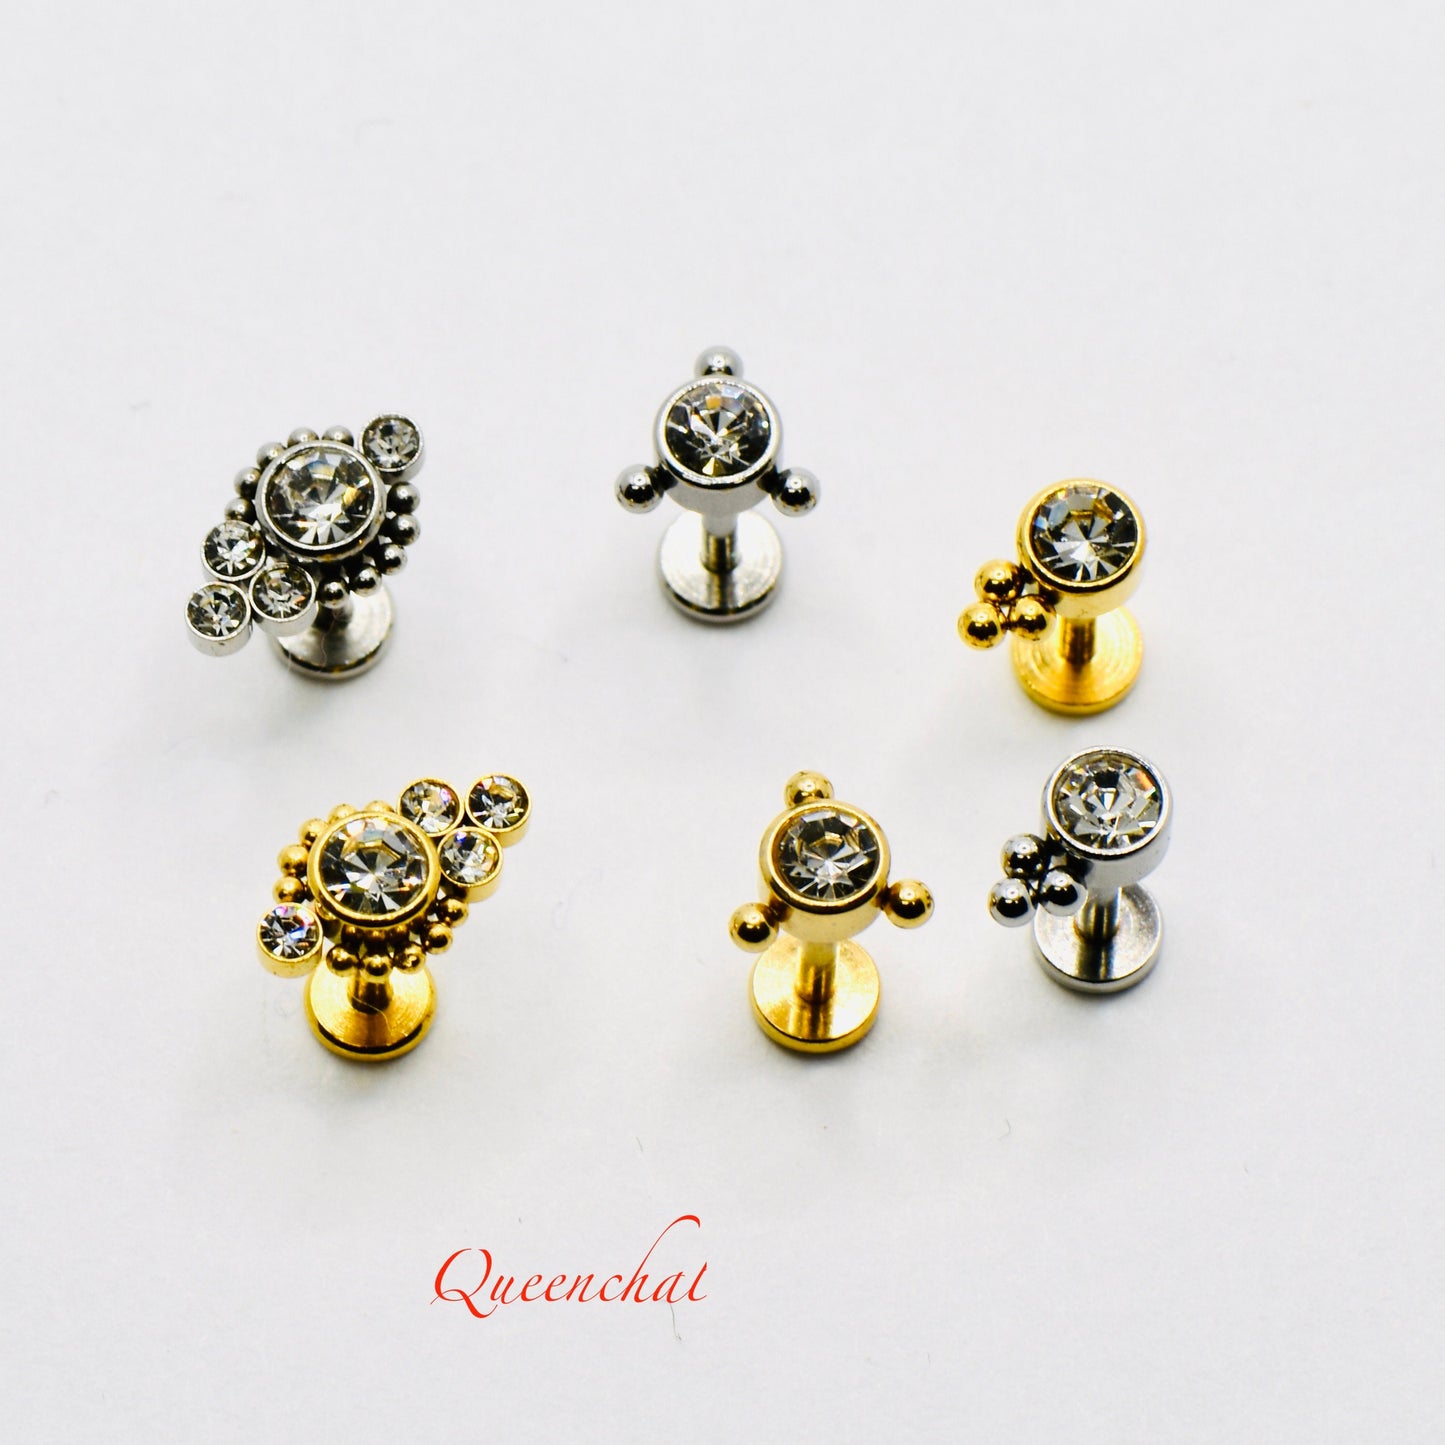 16g 316L Surgical Steel Internally Threaded Beaded Labret CZ Labret Stud Ear Piercing, Nose, Lip, Helix, Tragus, Conch Stud Earring 6mm Bar